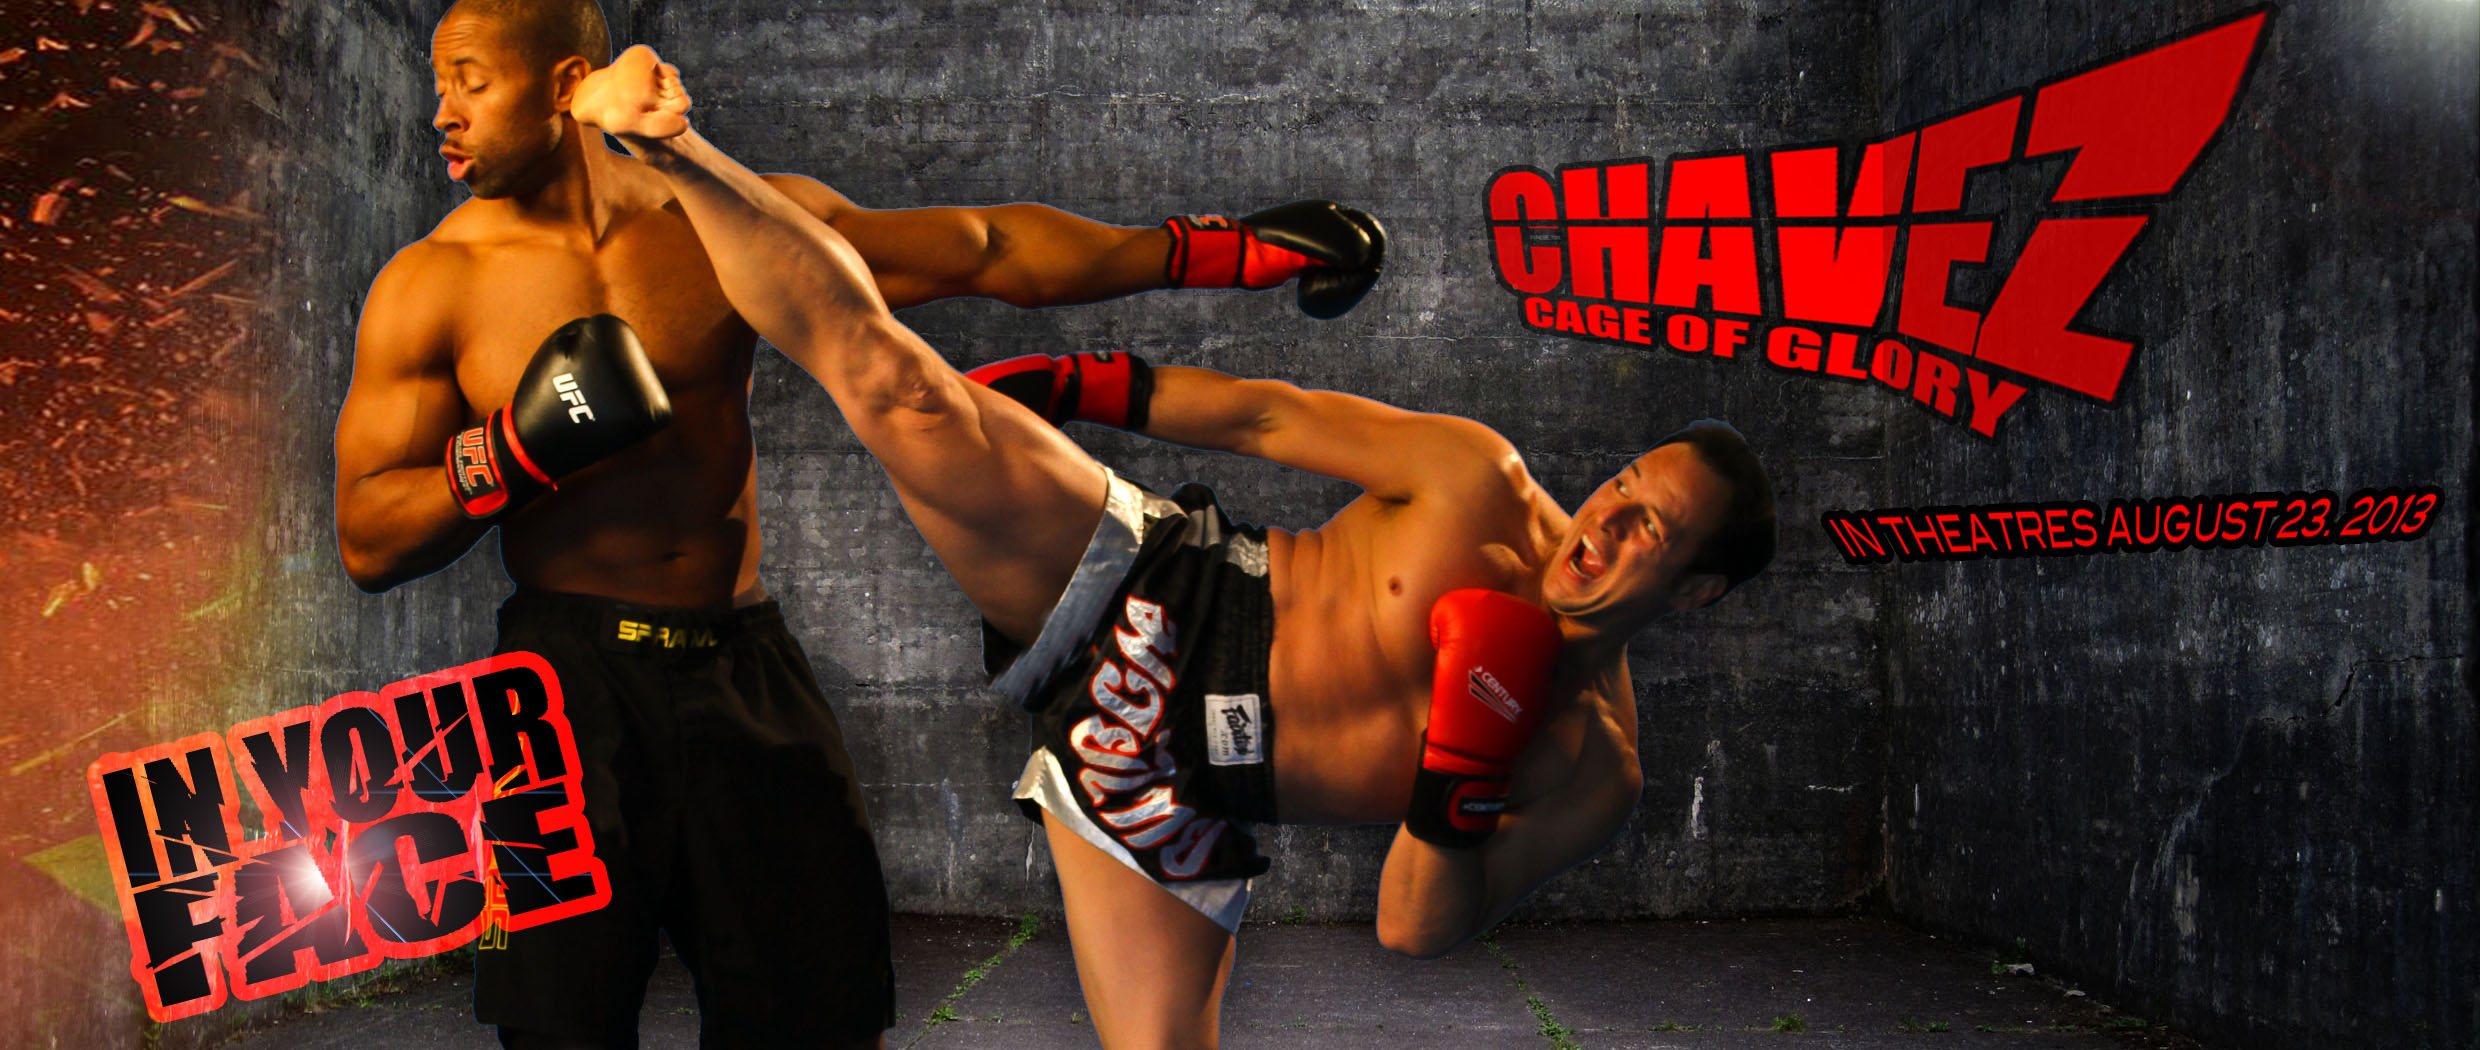 Hector Echavarria in Chavez Cage of Glory